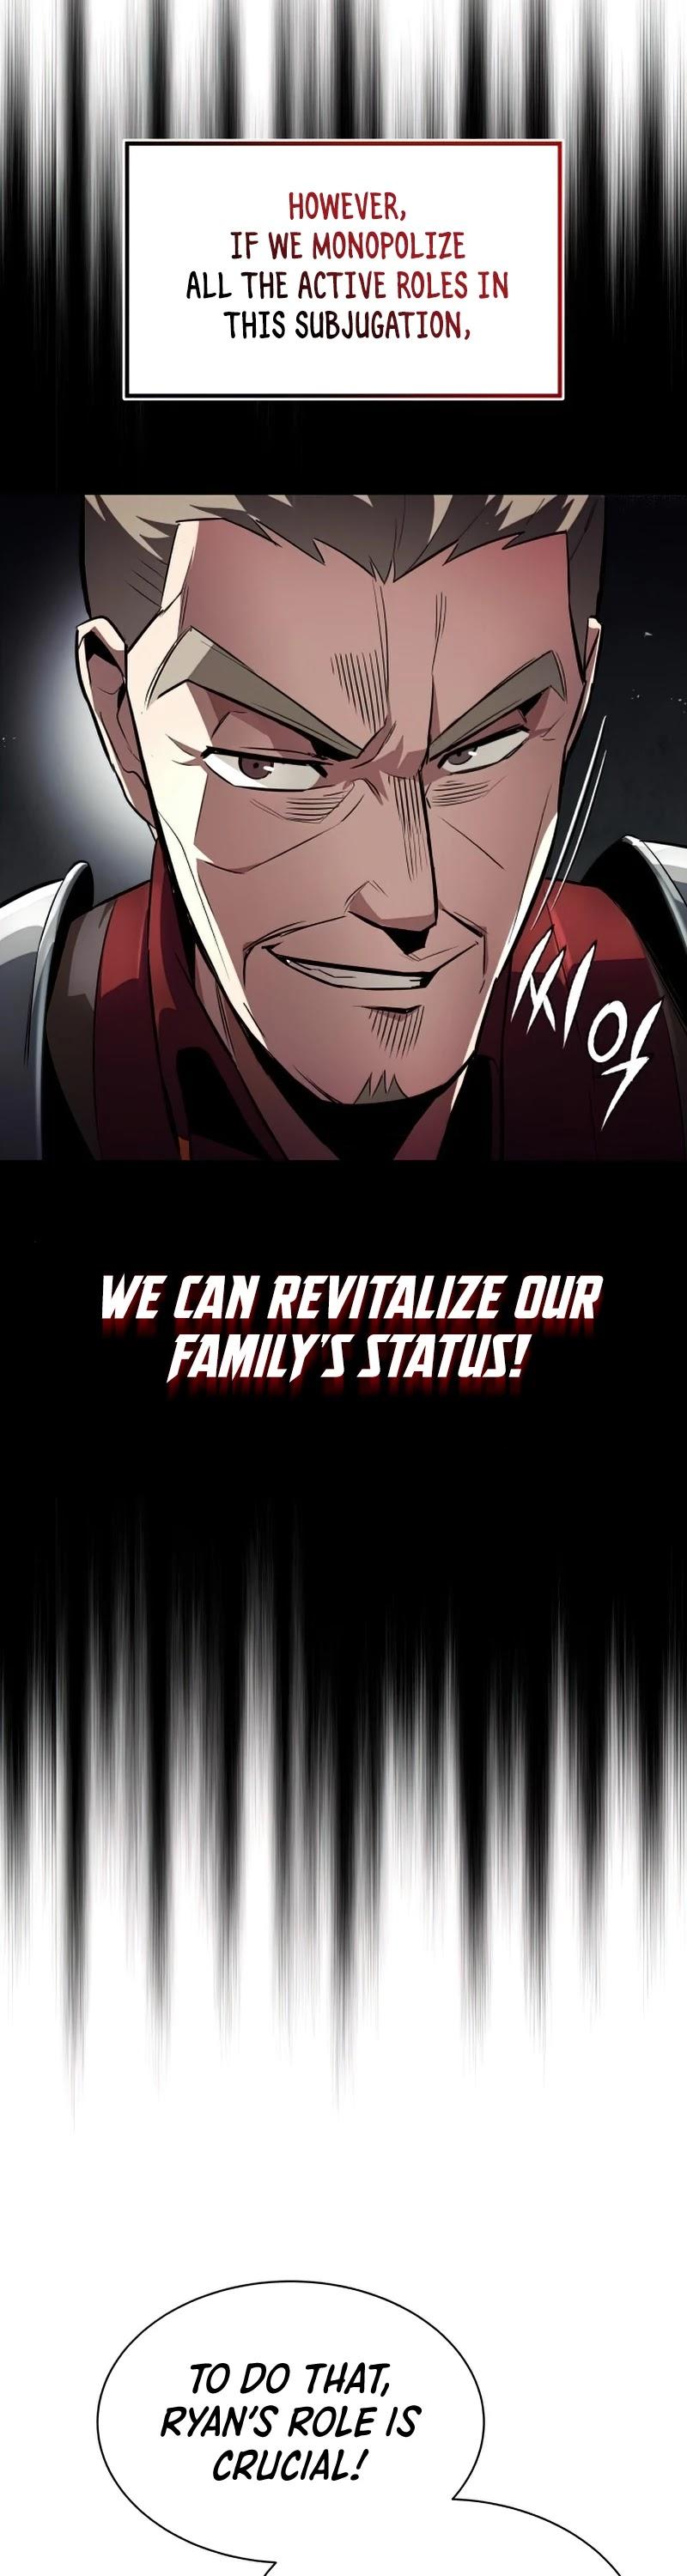 Reformation Of The Deadbeat Noble Chapter 34 page 8 - Mangakakalot